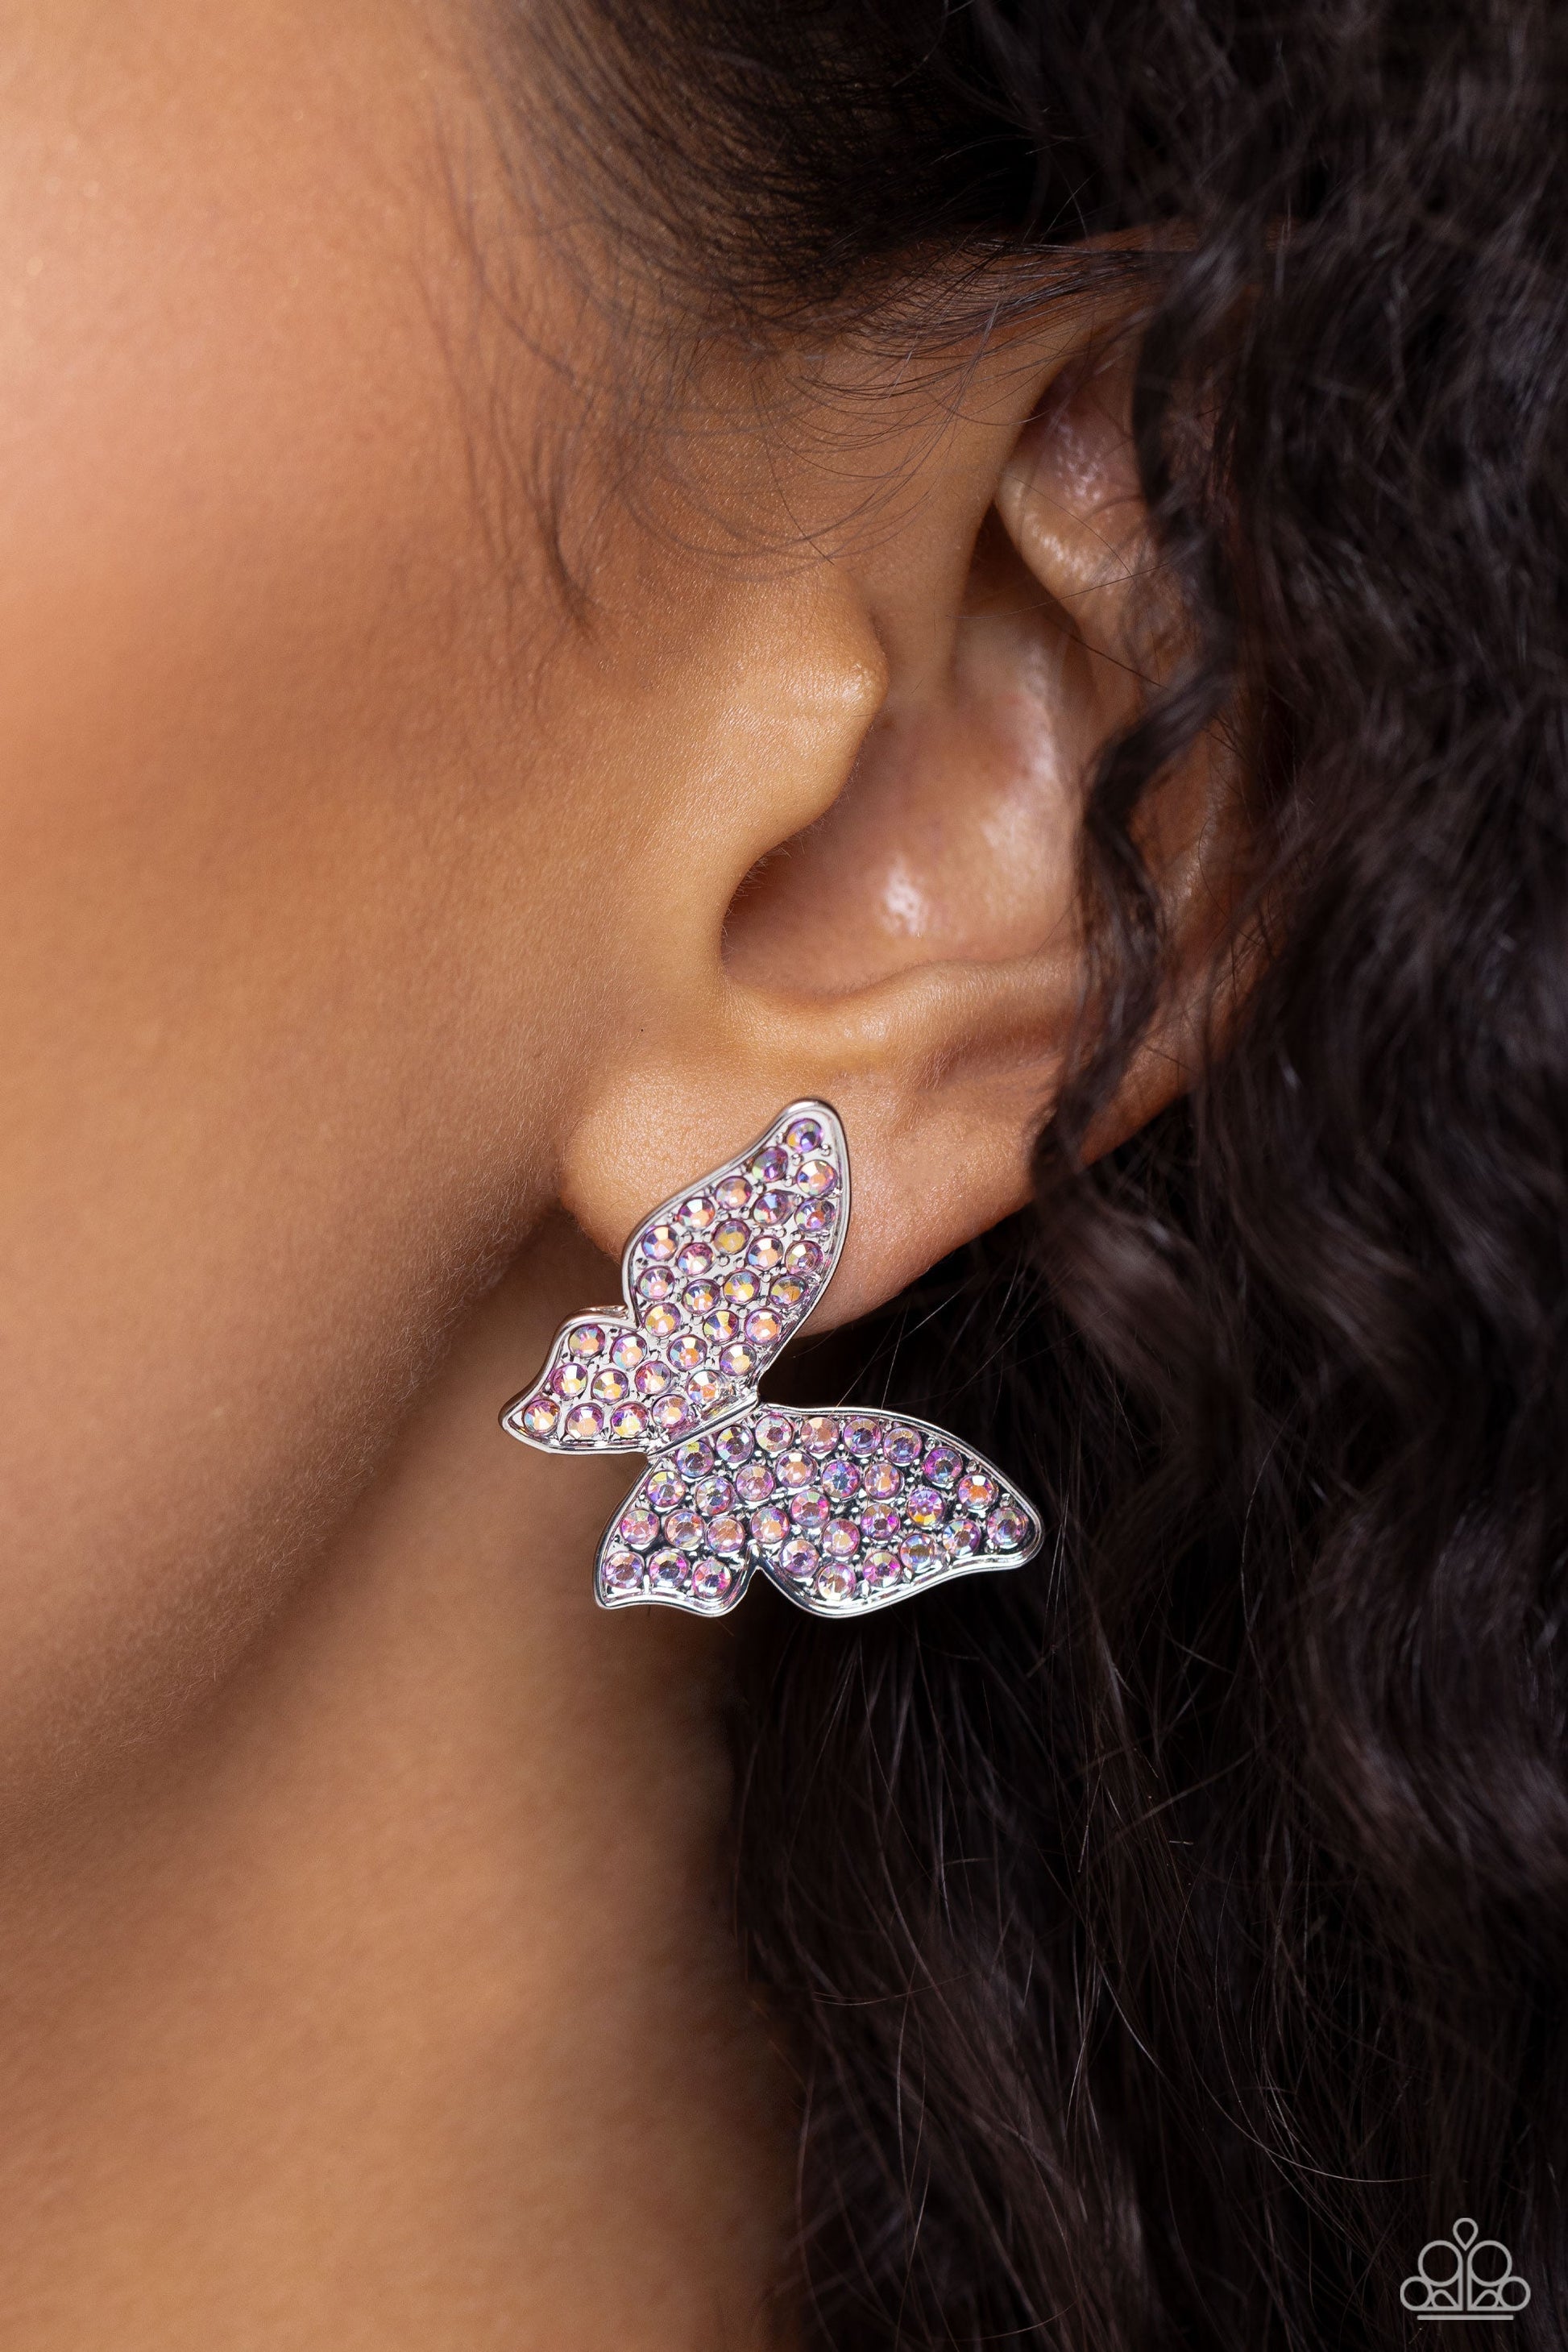 High Life - Pink Butterfly Earrings - Paparazzi Accessories - Featuring a tilted motif, a silver butterfly encrusted with an explosion of pink iridescent rhinestones sparkles at the ear for an enchanting fashion. Earring attaches to a standard post fitting. Due to its prismatic palette, color may vary. Sold as one pair of post earrings.